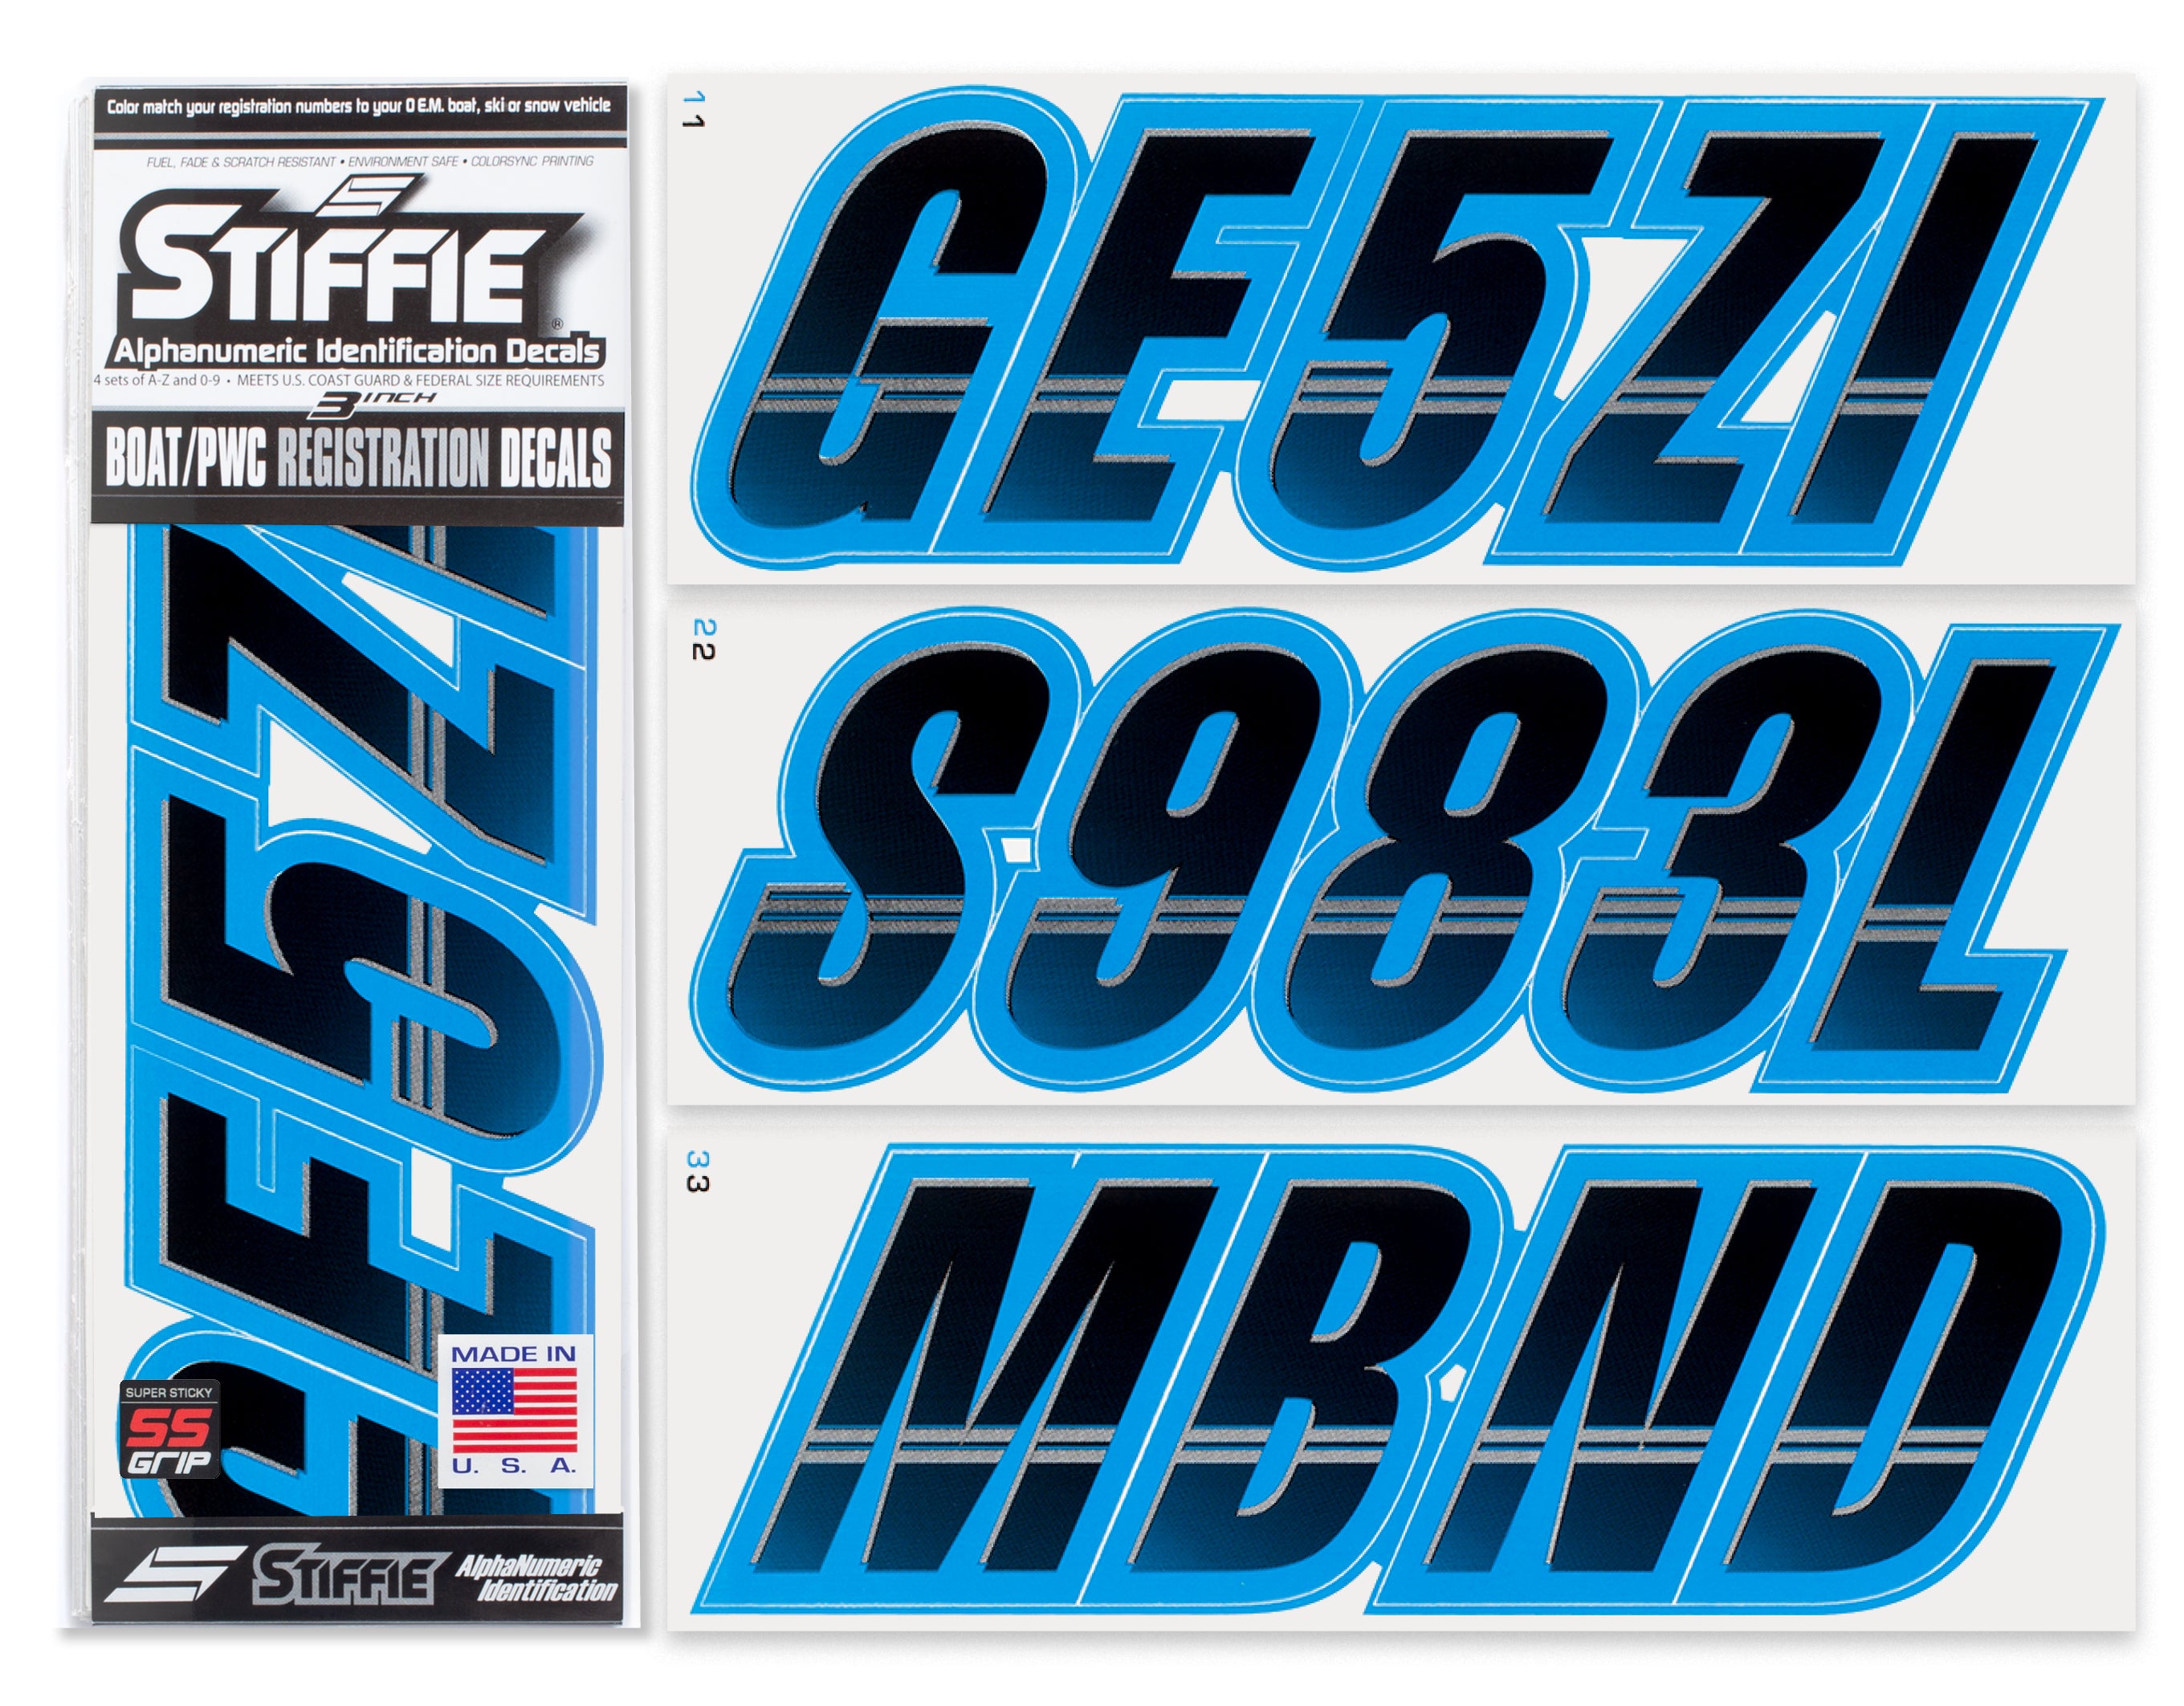 Stiffie Techtron Black/Blueberry Blue Super Sticky 3" Alpha Numeric Registration Identification Numbers Stickers Decals for Sea-Doo Spark, Inflatable Boats, Ribs, Hypalon/PVC, PWC and Boats